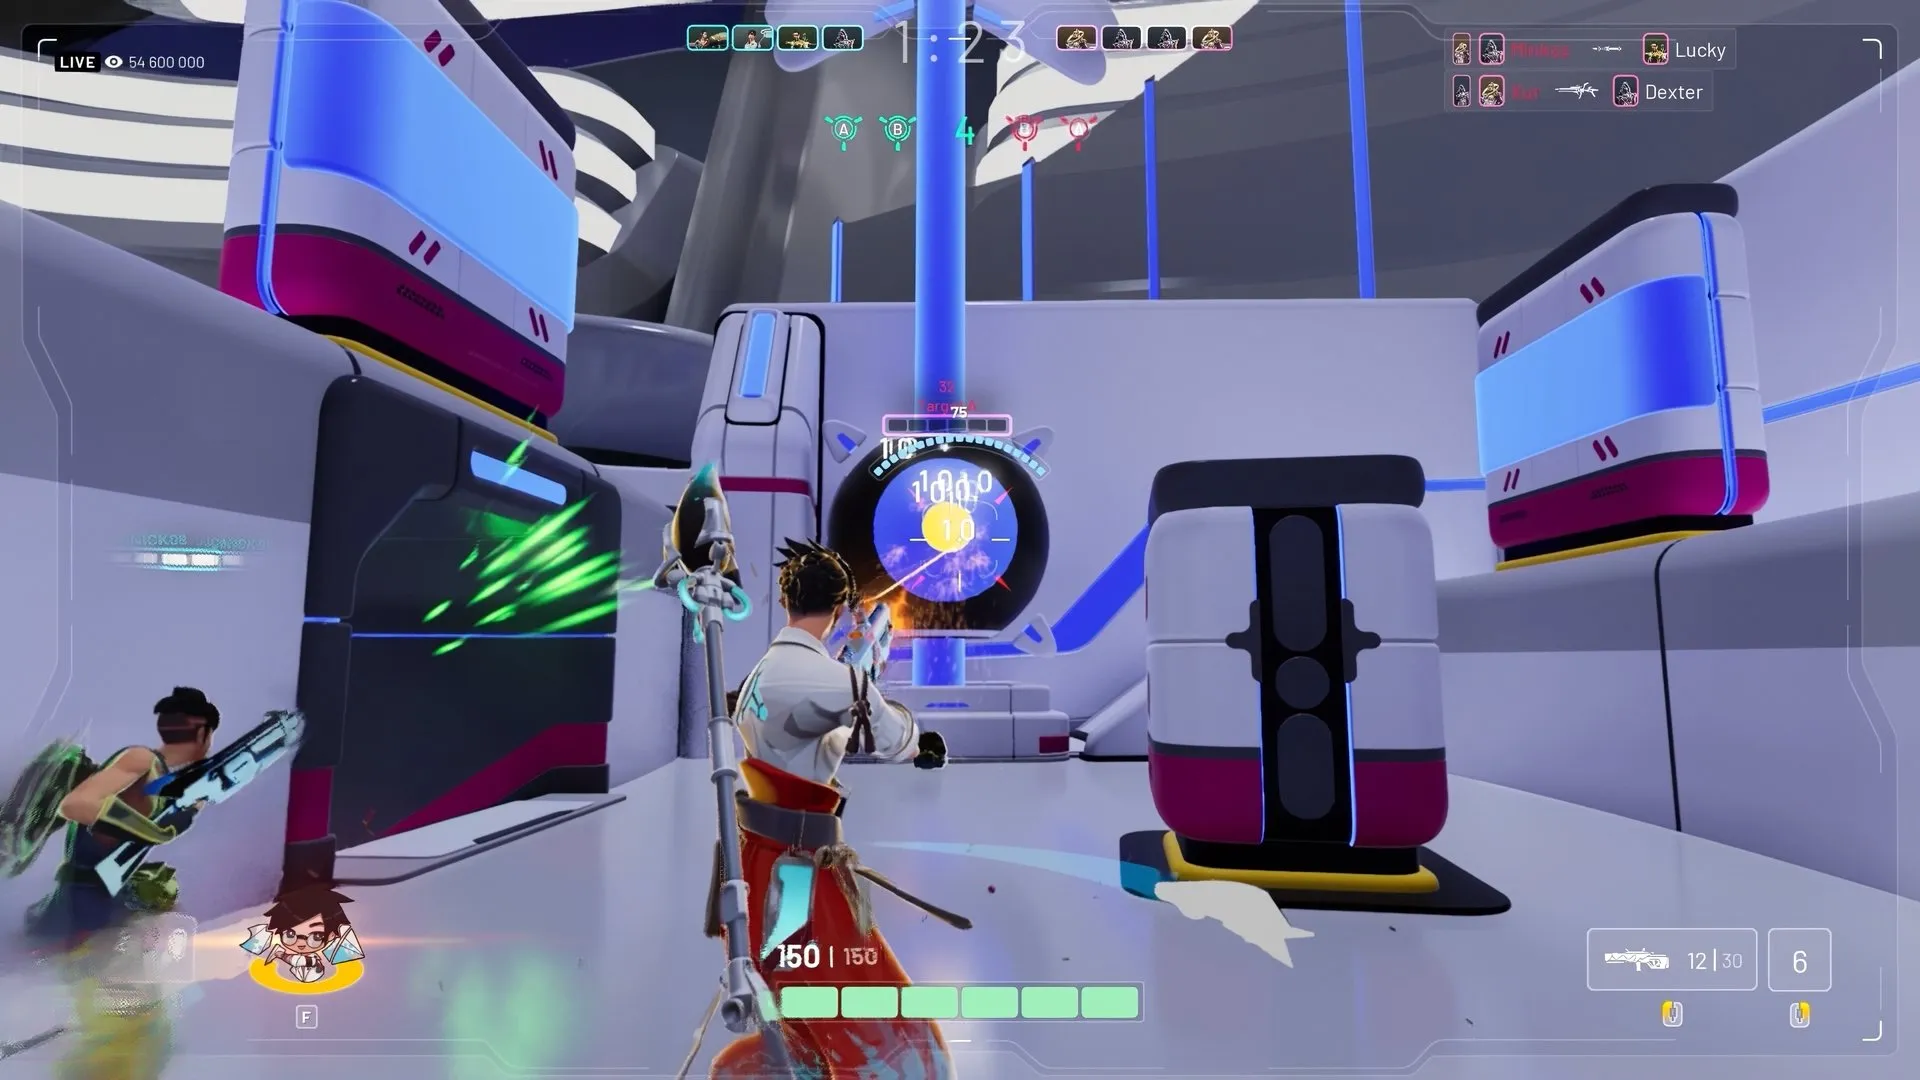 Practice range screenshot showing two characters in target practice. One is shooting a bull's eye.